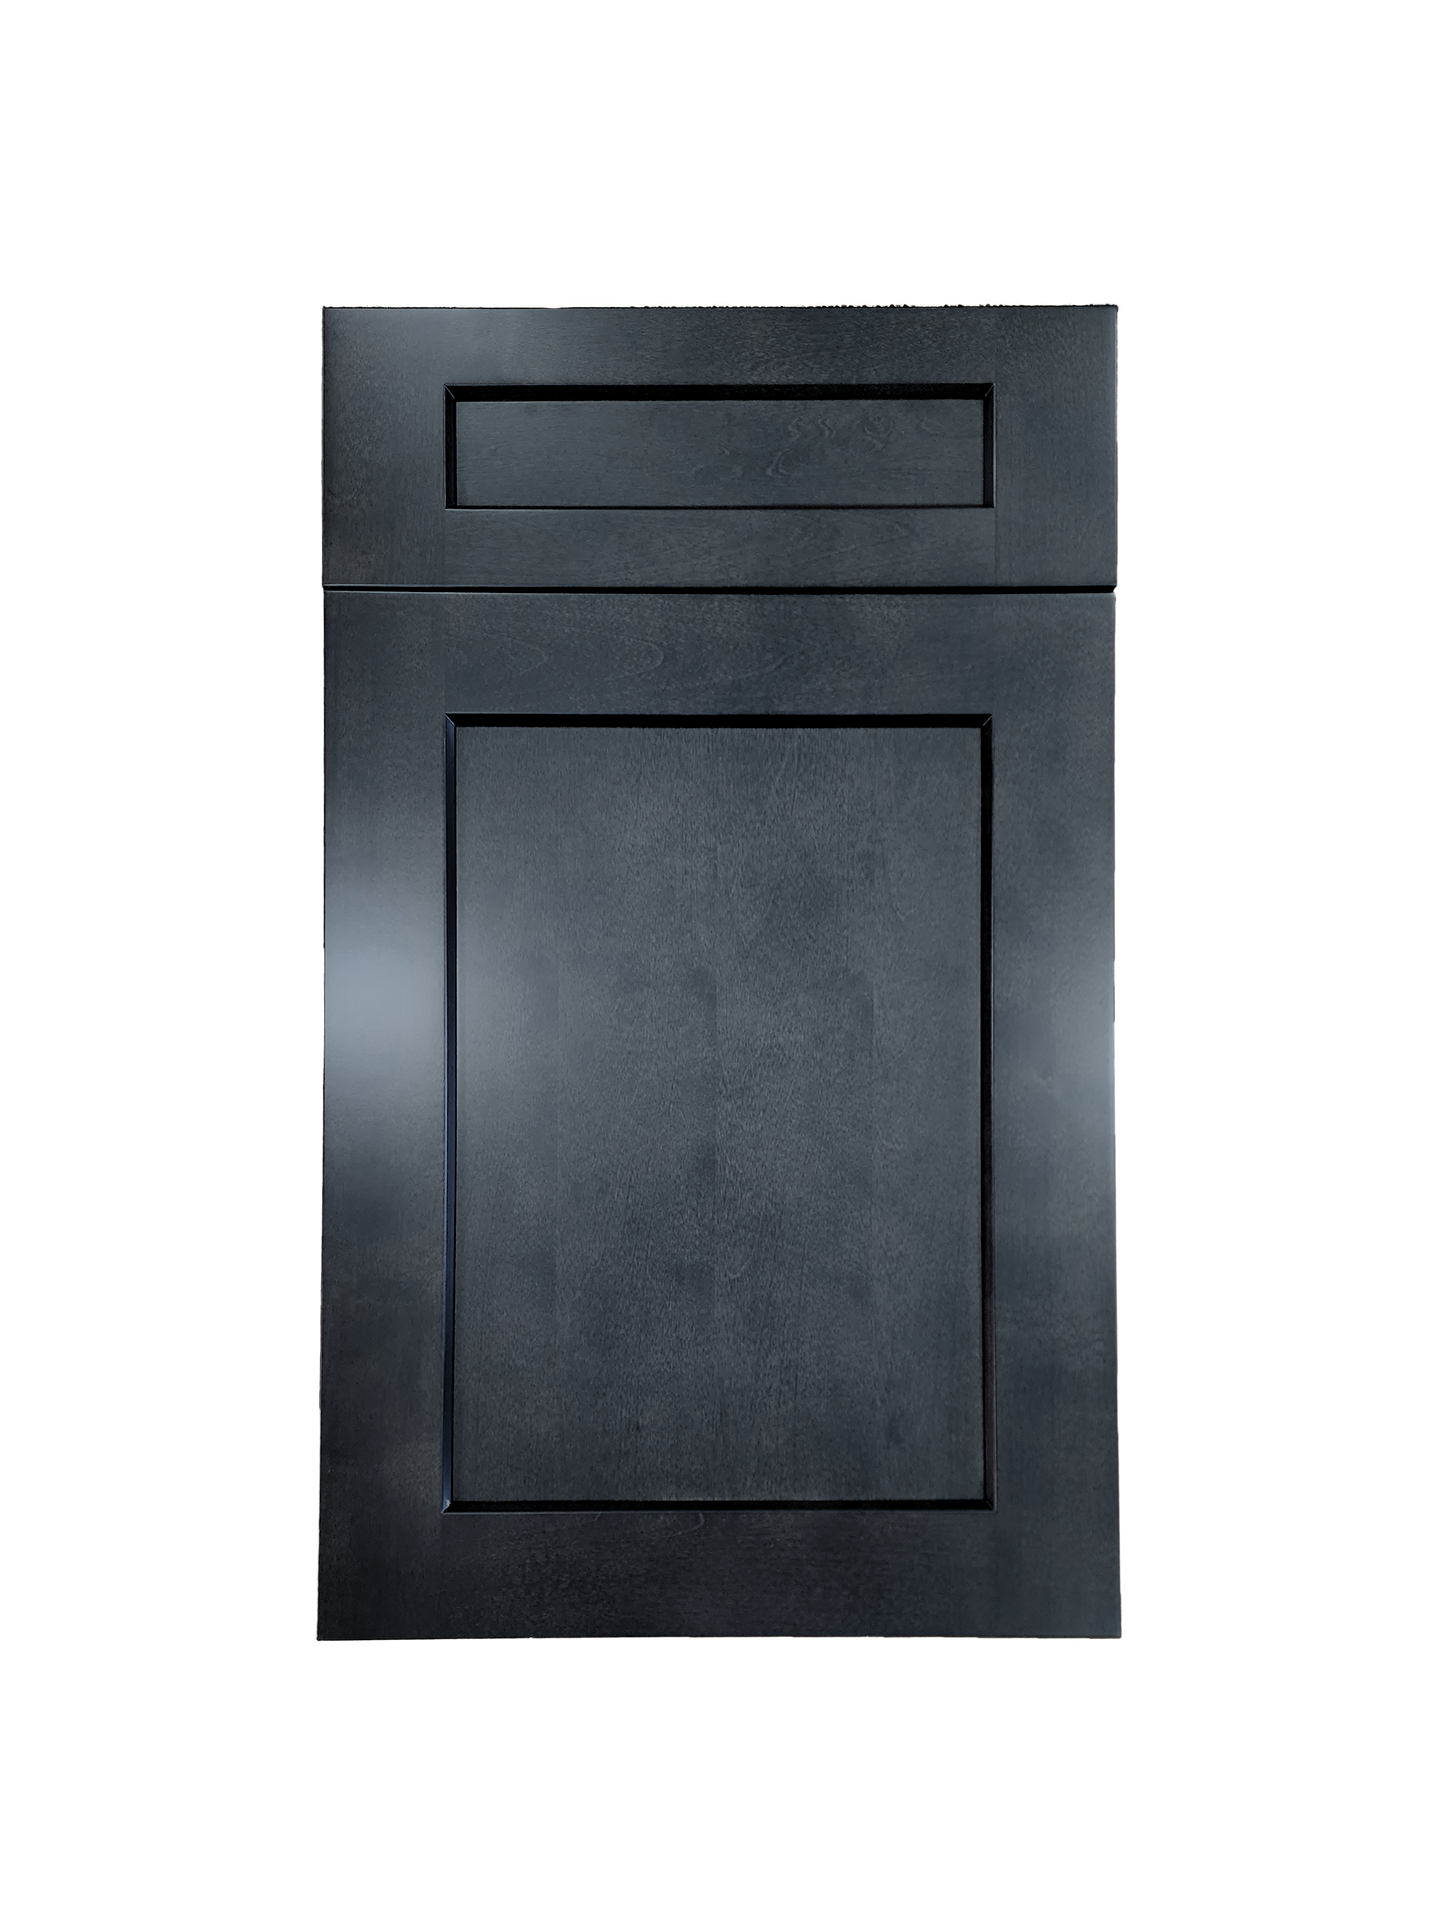 Stormy Grey Wall Cabinet 36 inches wide 12 inches deep 21 inches tall with Stormy Grey box and Stormy Grey doors